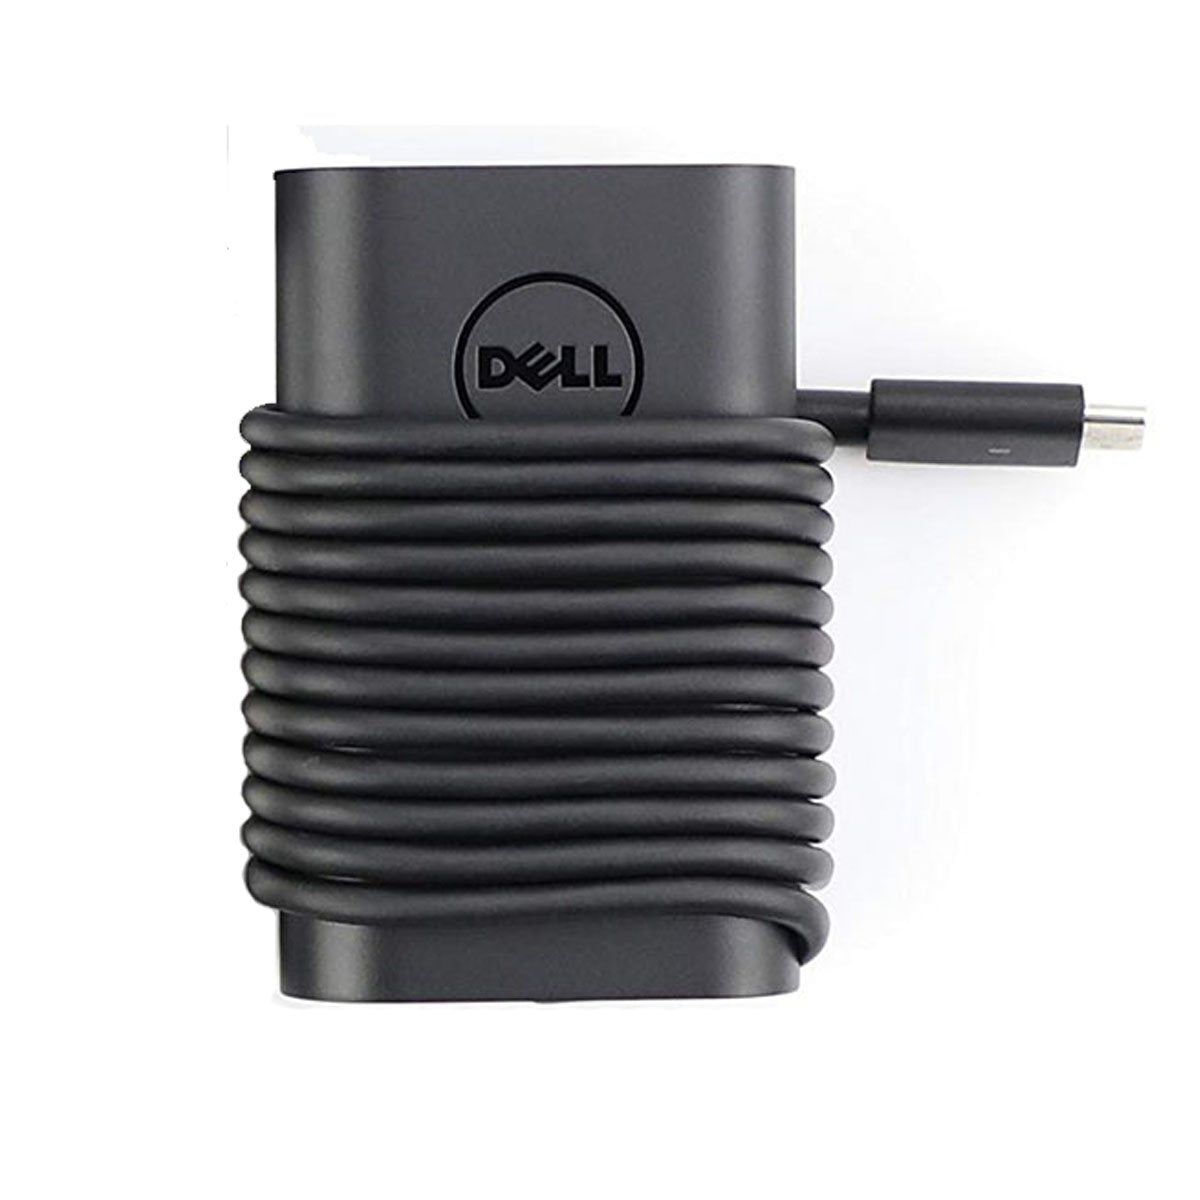 Dell Original 45W 20V USB Type C Laptop Charger Adapter (No Power Cable)